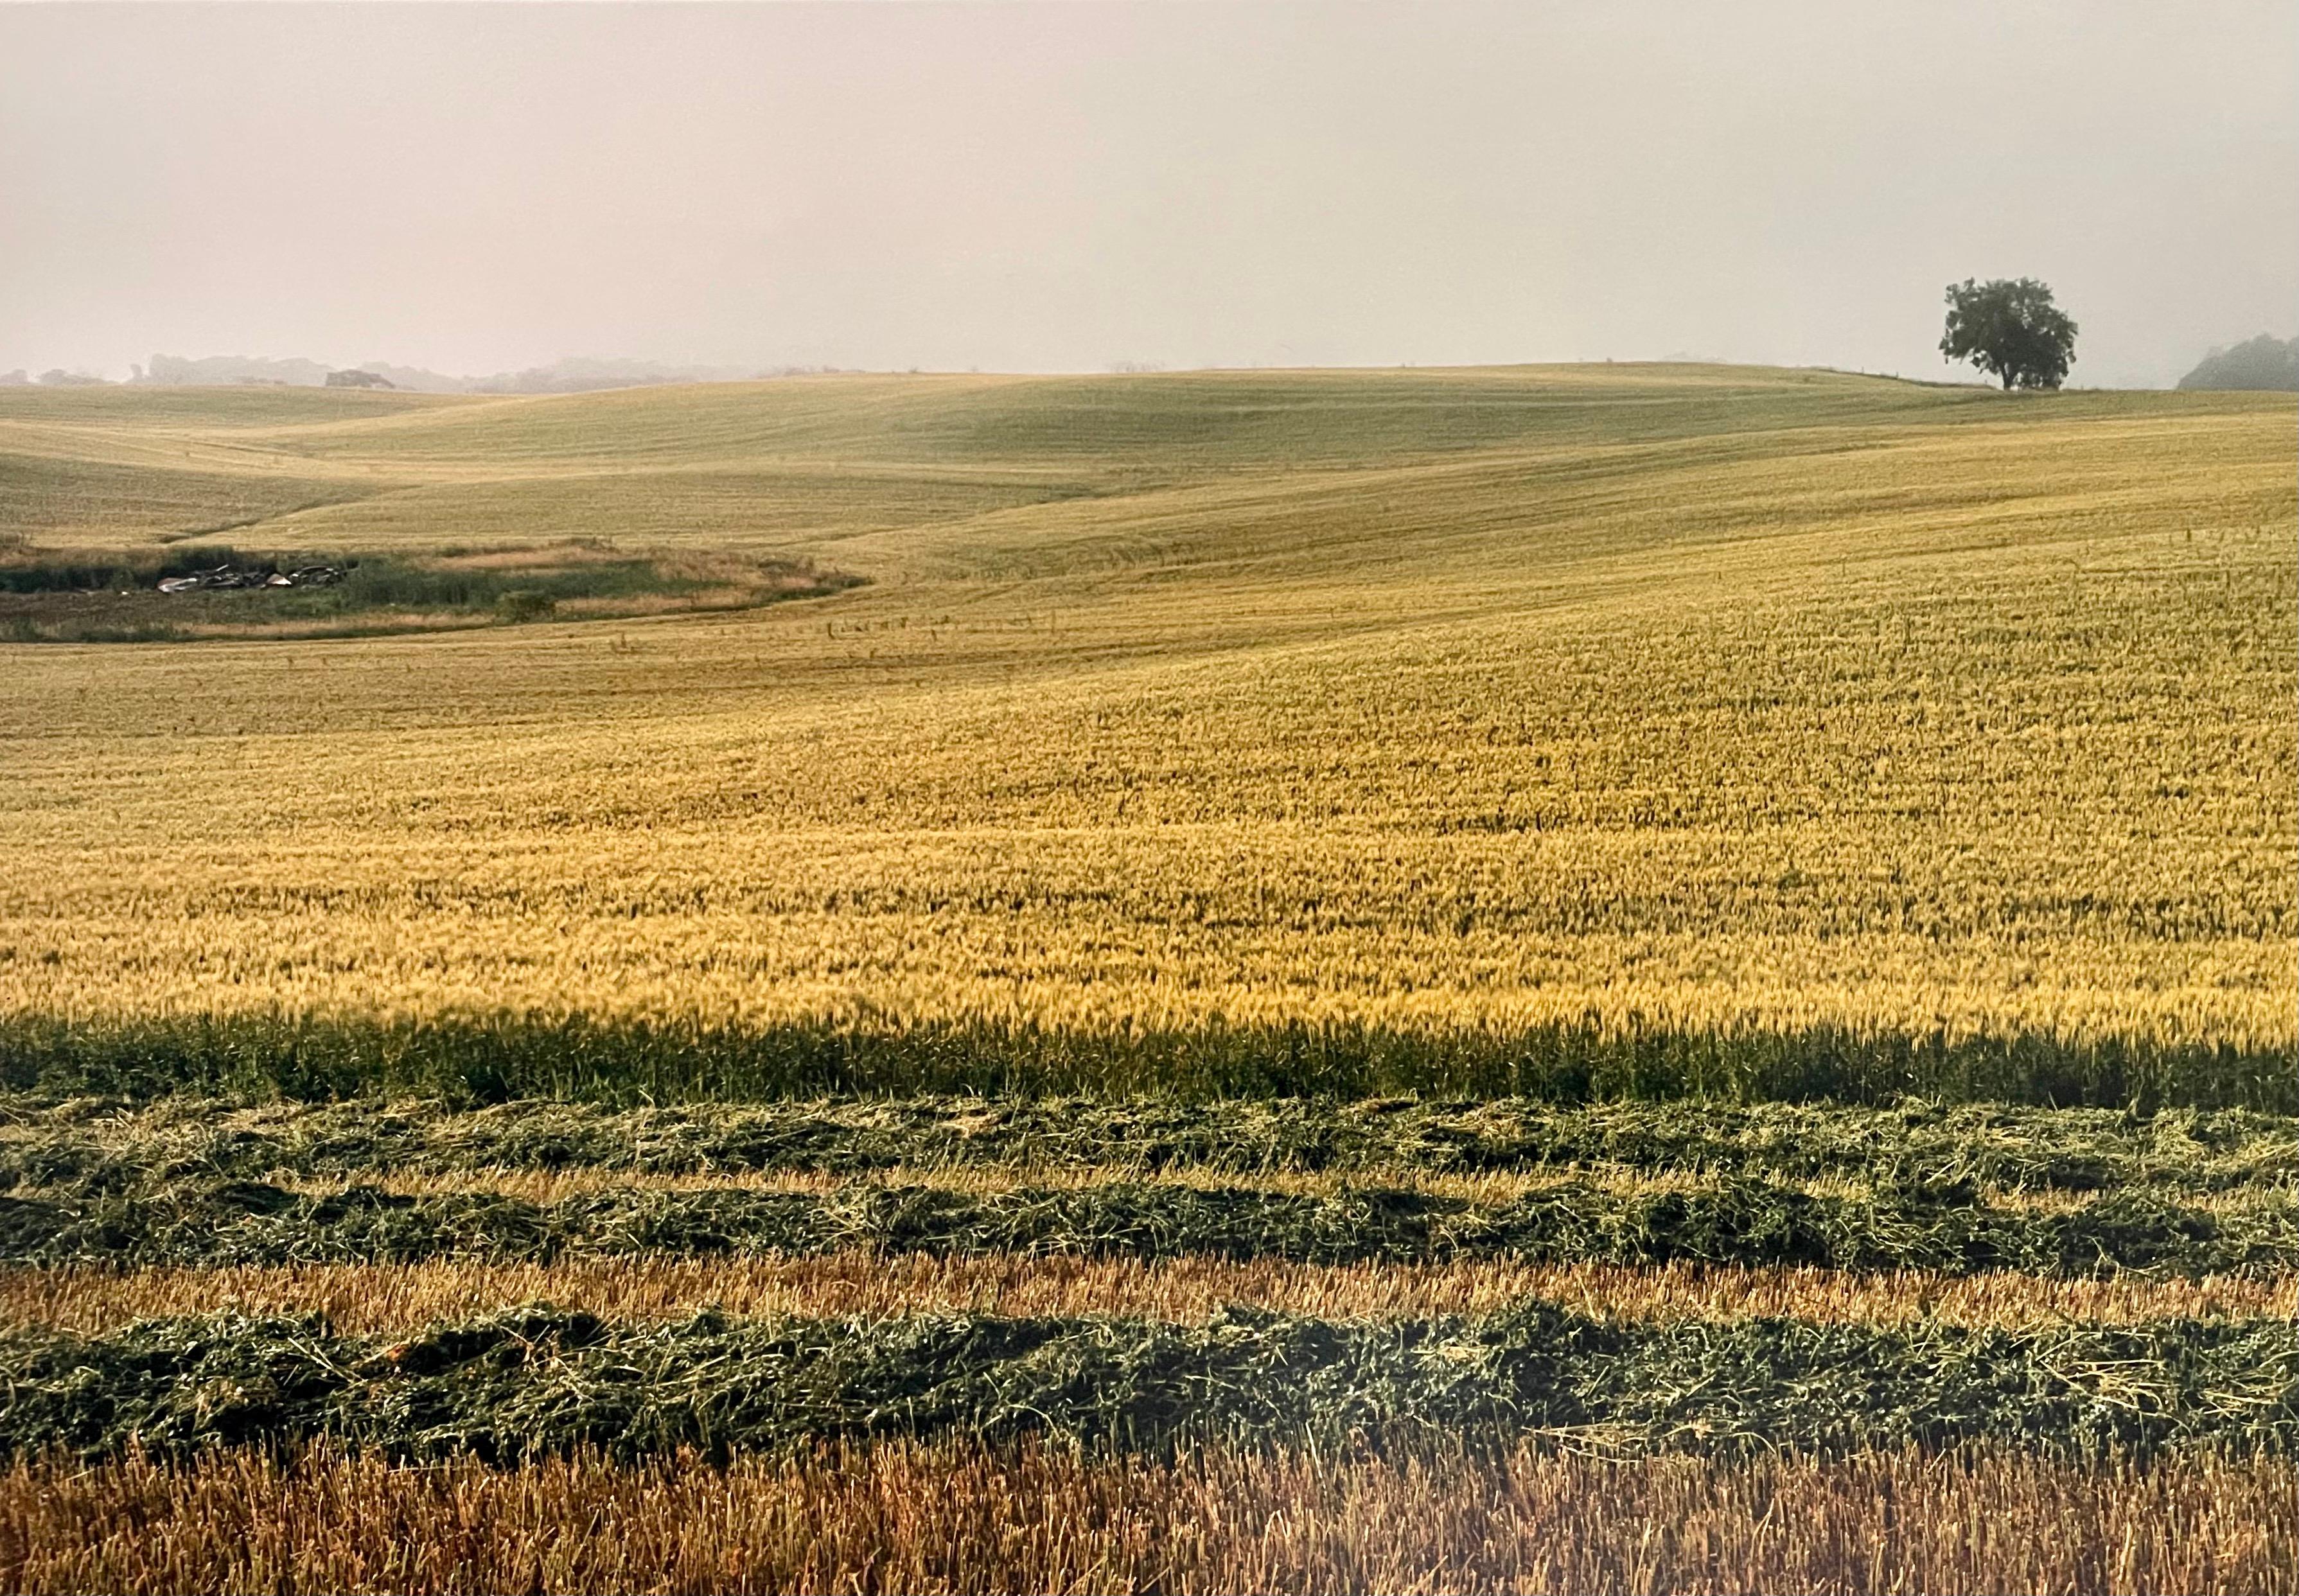 Everts Township Homestead, Summer, 1992
Fabulous American landscape photography of a rural landscape scene. 
from small hand signed edition of 20
Large Format Chromogenic print on Kodak Professional Paper
The sheets are approximately 30 X 56